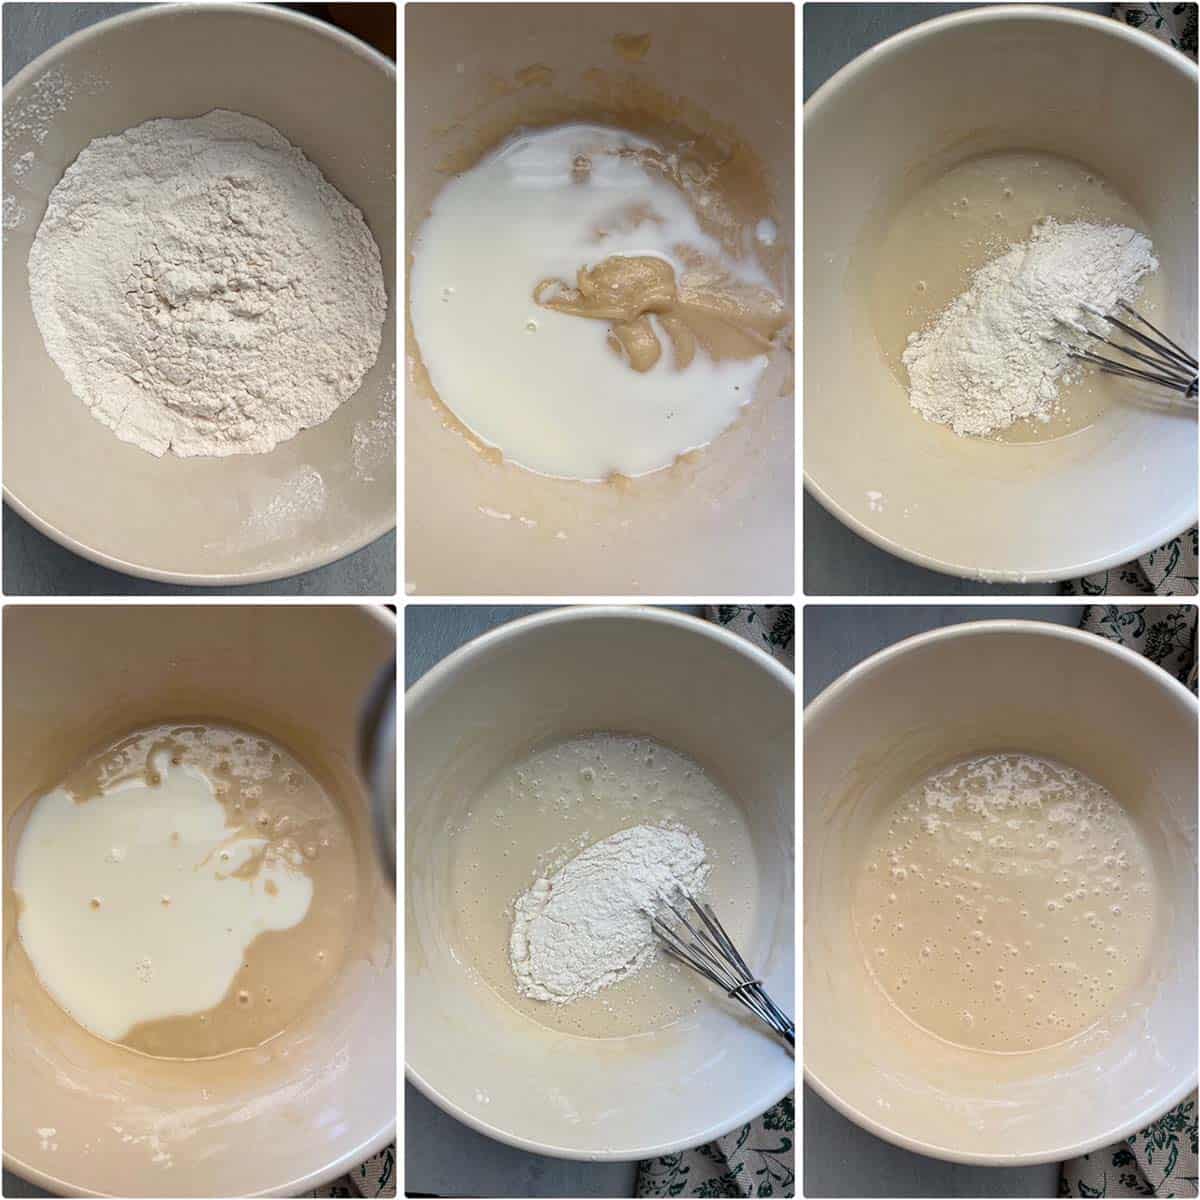 6 panel photo showing the mixing of batter ingredients.